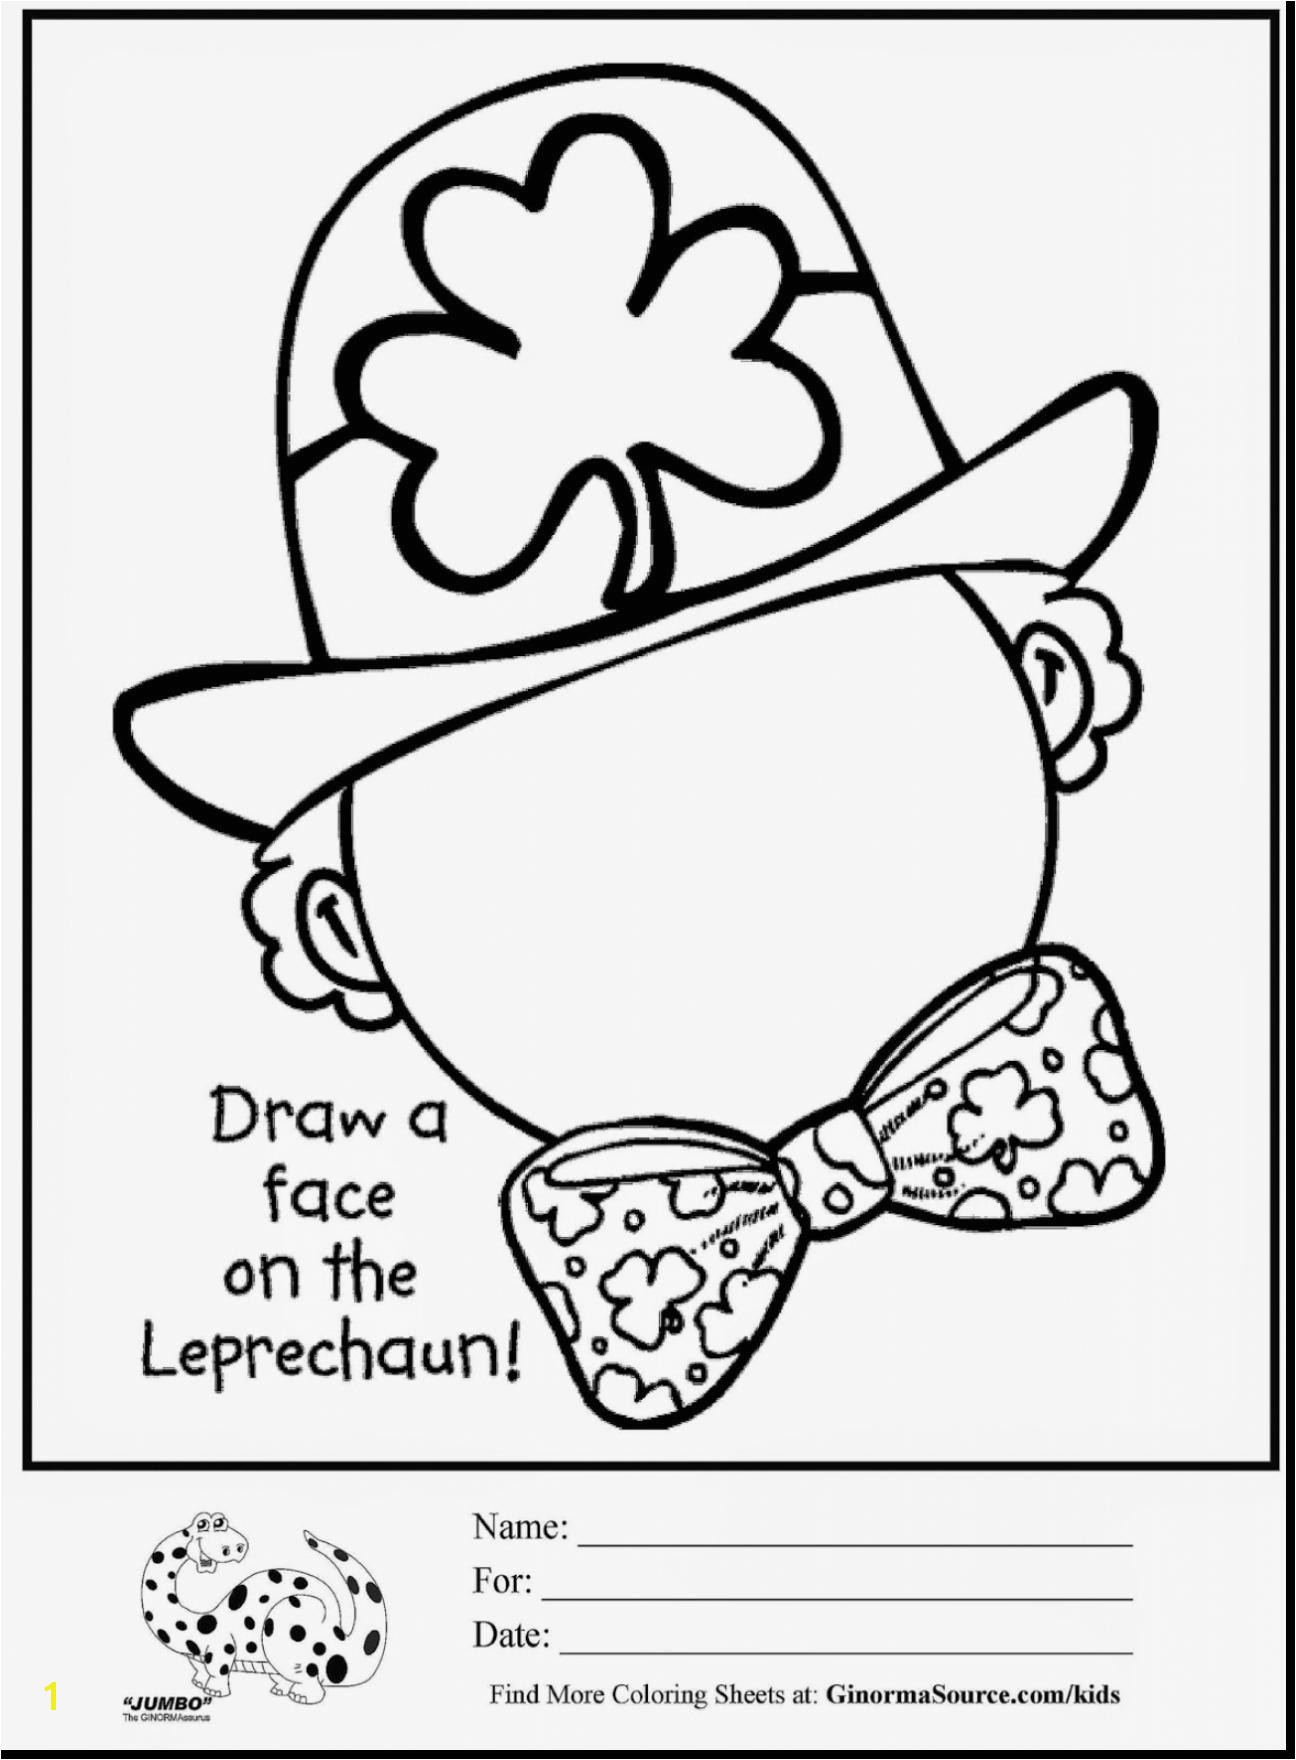 Leprechaun Face Coloring Page Coloring Pages for St Patricks Day New St Patricks Day Color Pages